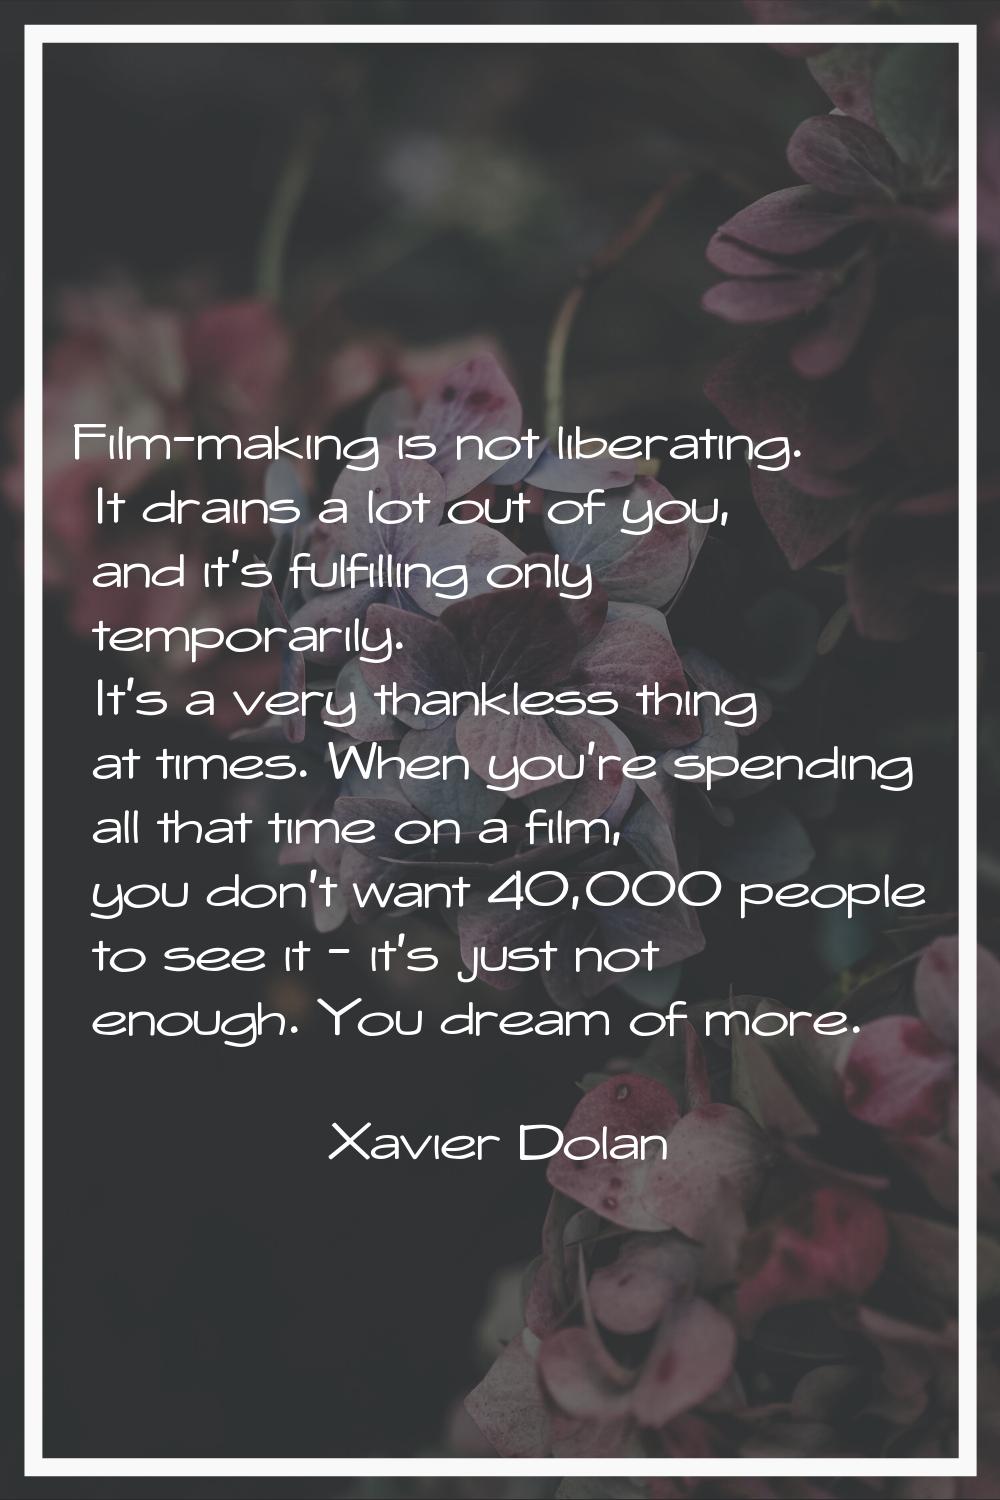 Film-making is not liberating. It drains a lot out of you, and it's fulfilling only temporarily. It